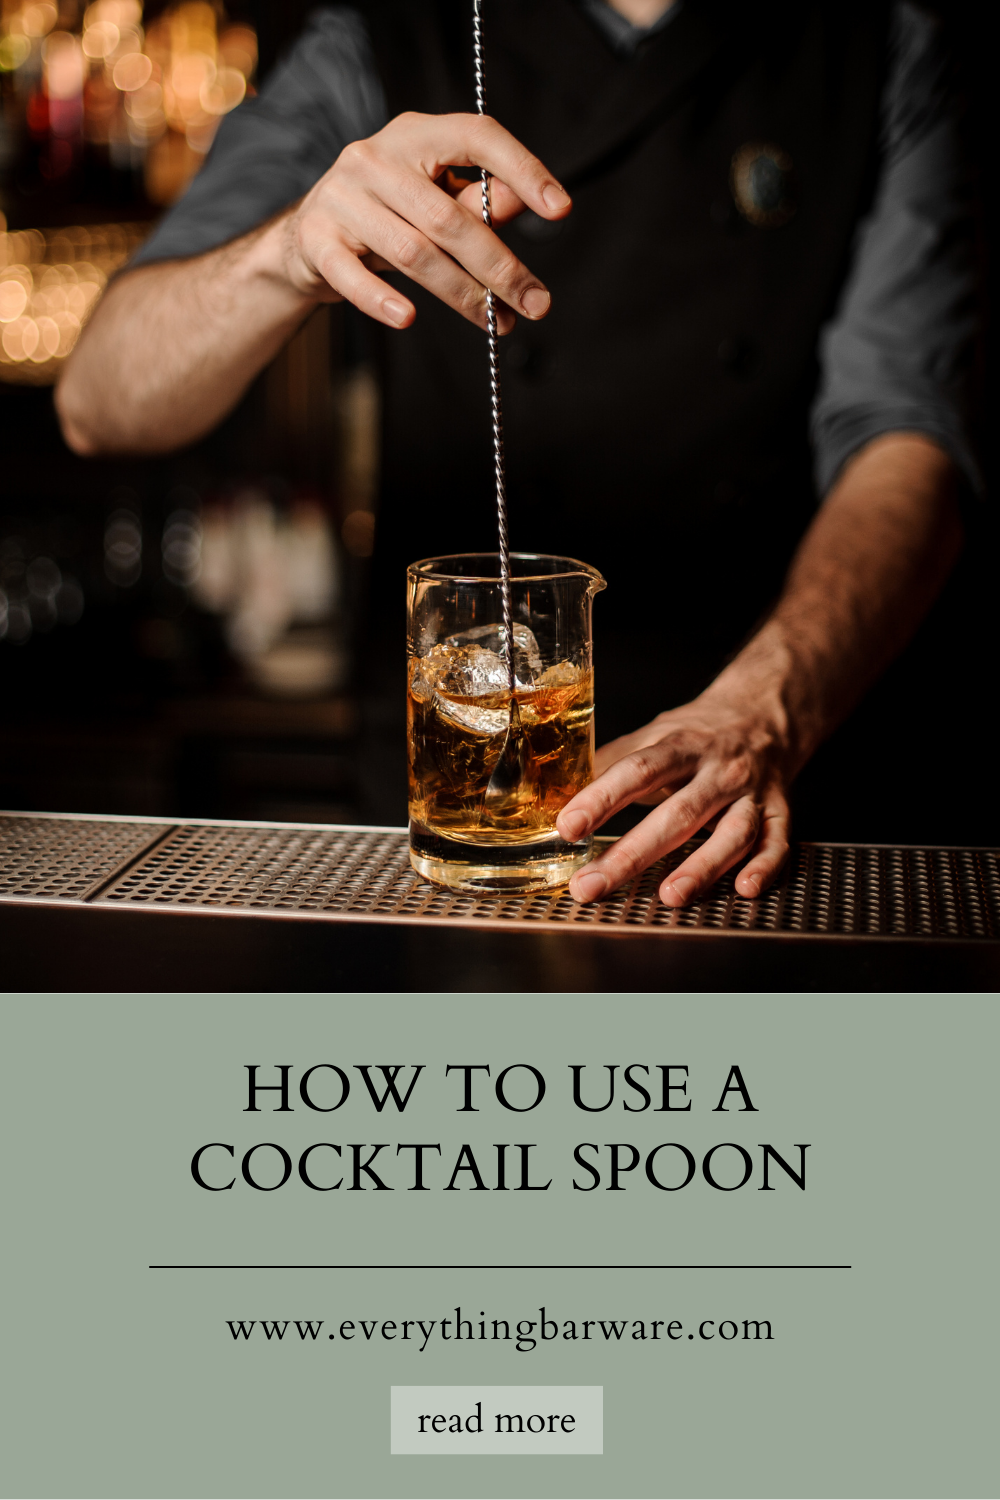 Cocktail Spoons - How and Why to Use One